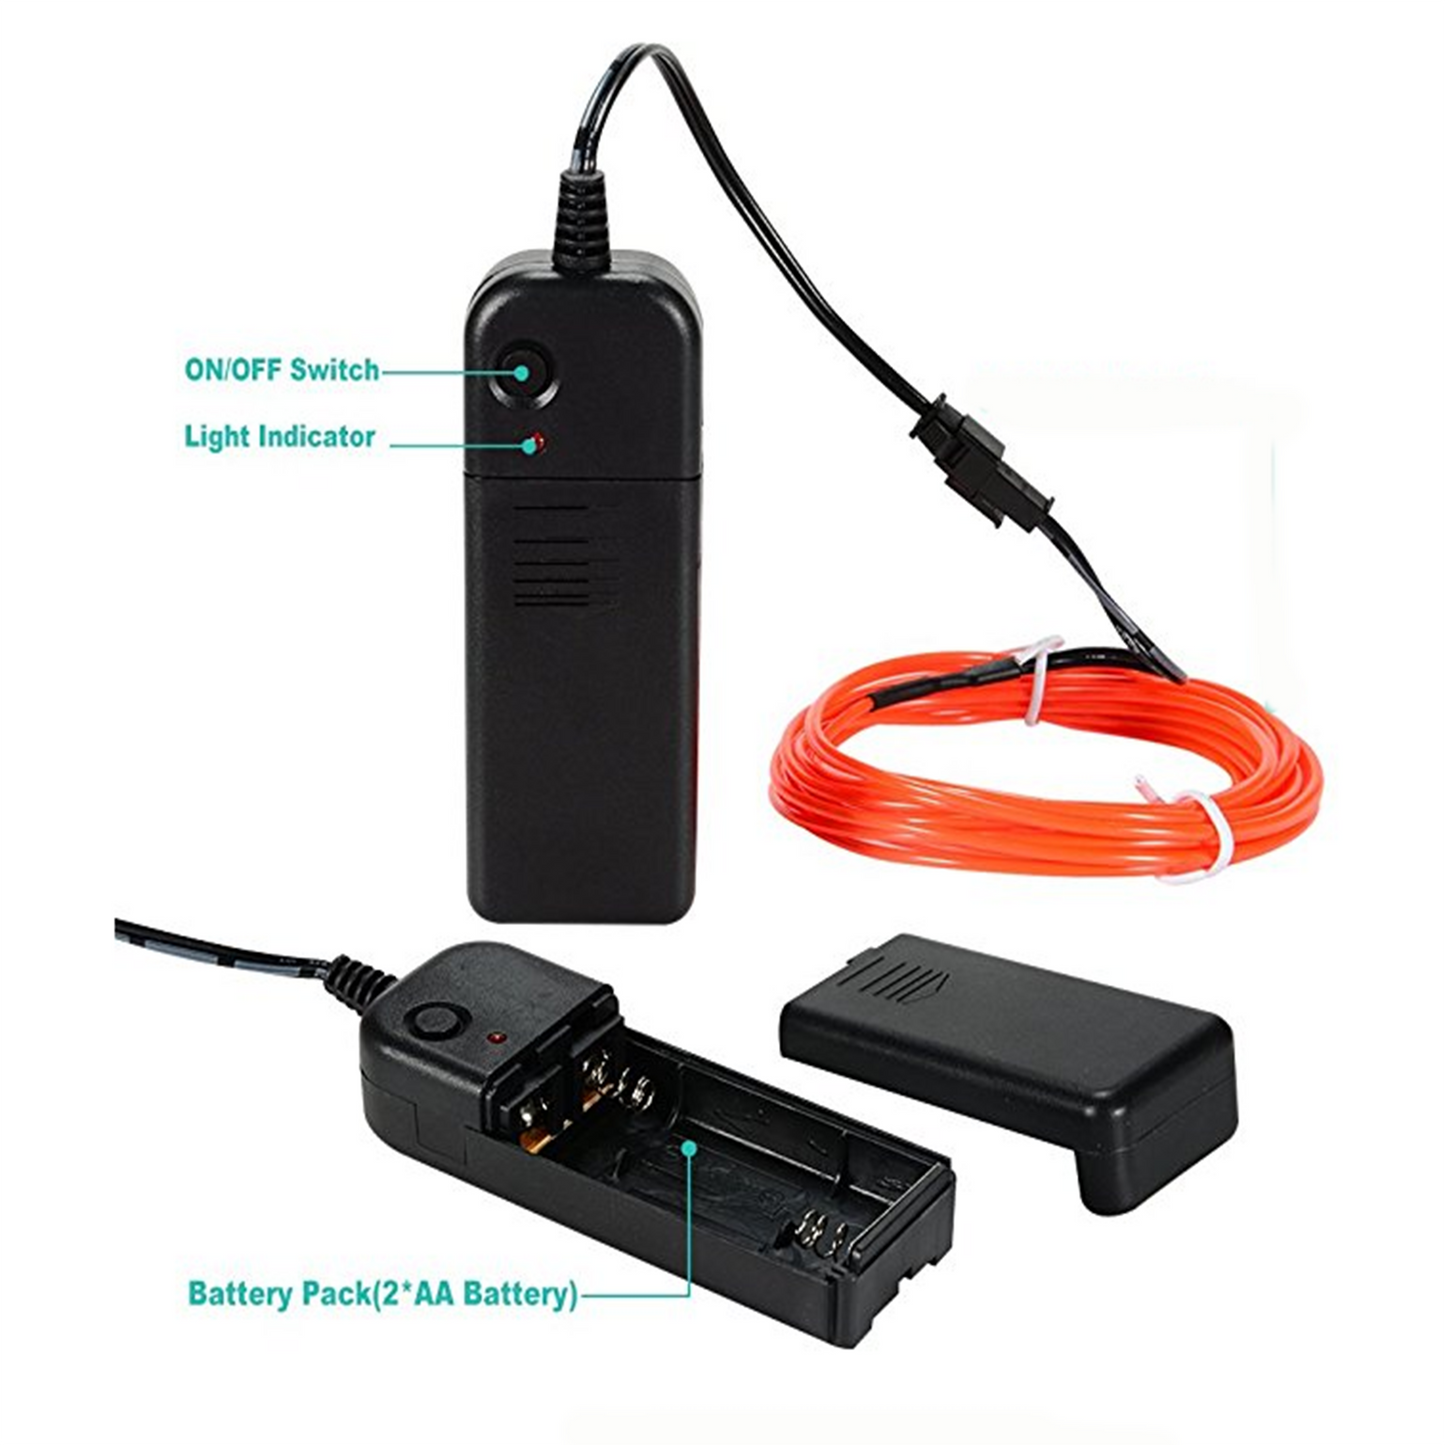 Neon wire battery pack image